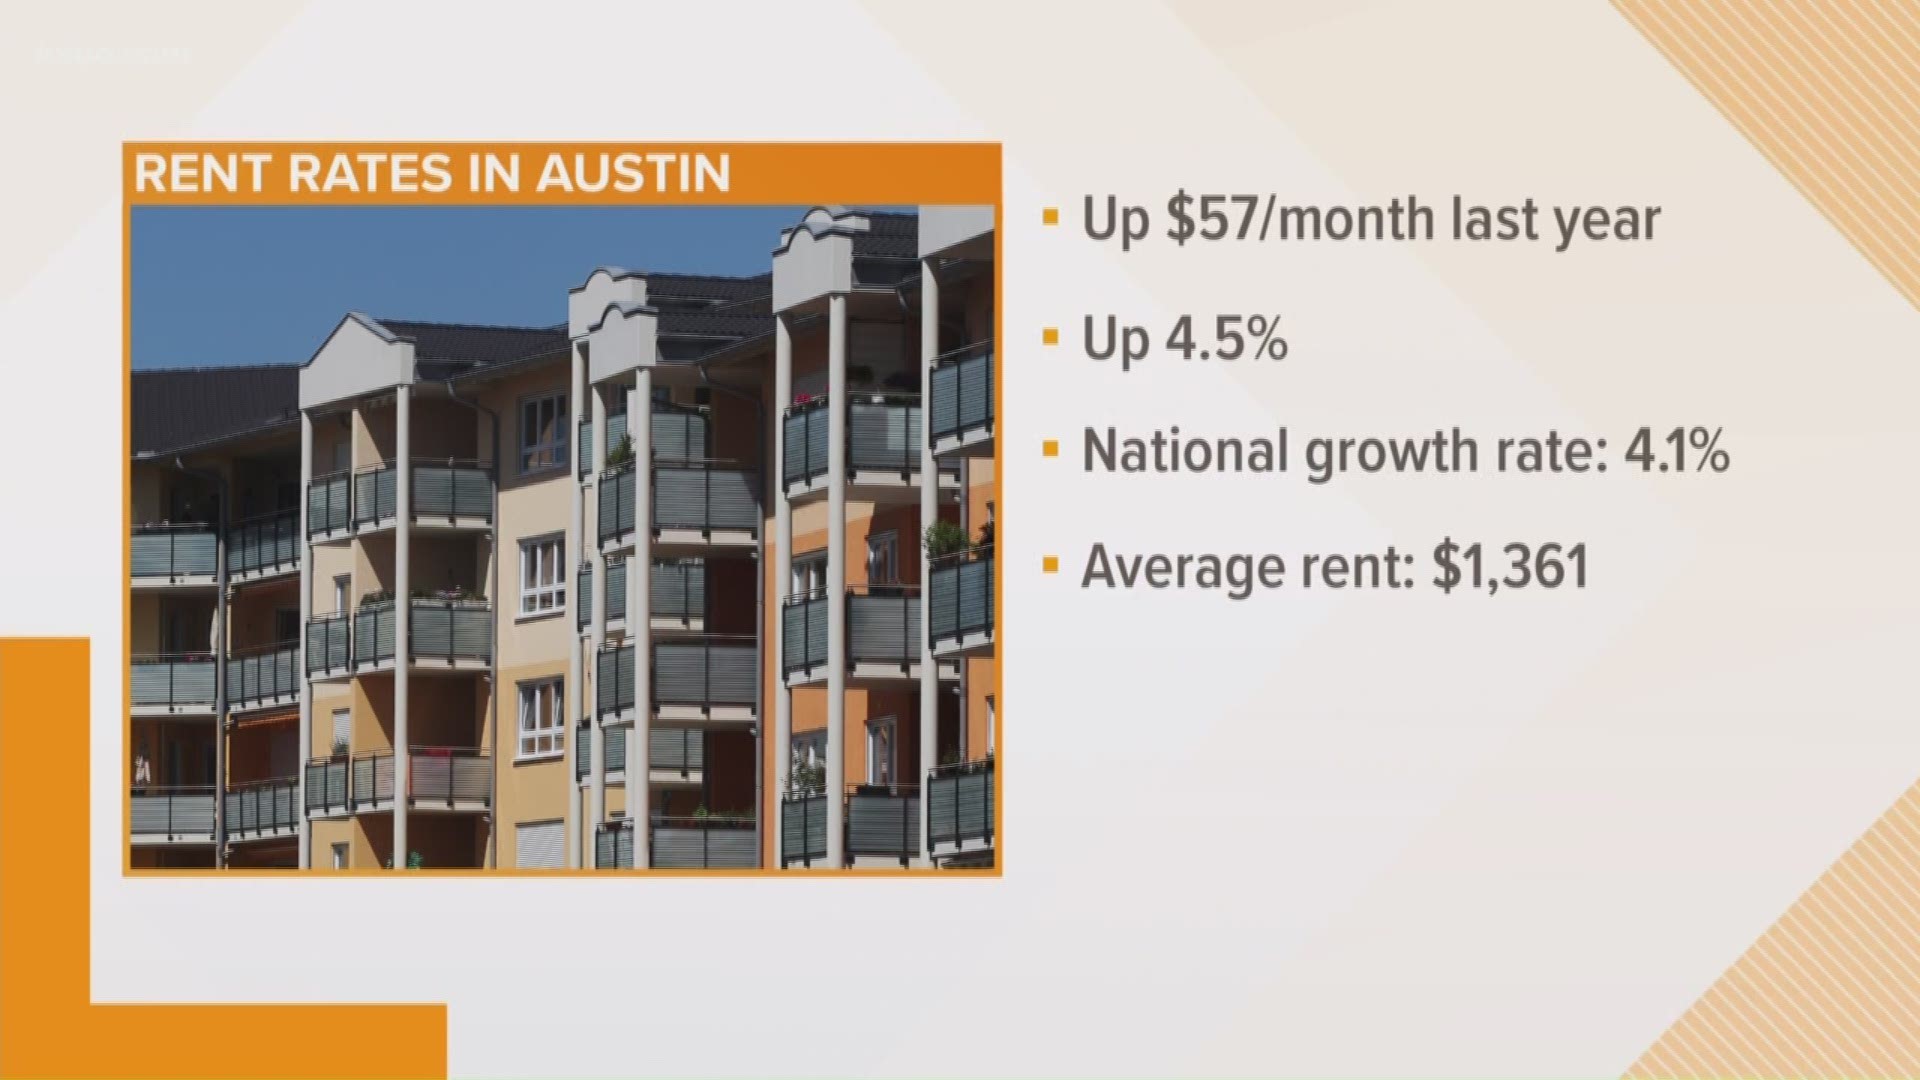 There's more bad news for Austin's affordability issue. The price to rent an apartment in the Capitol City is rising faster than the national average.